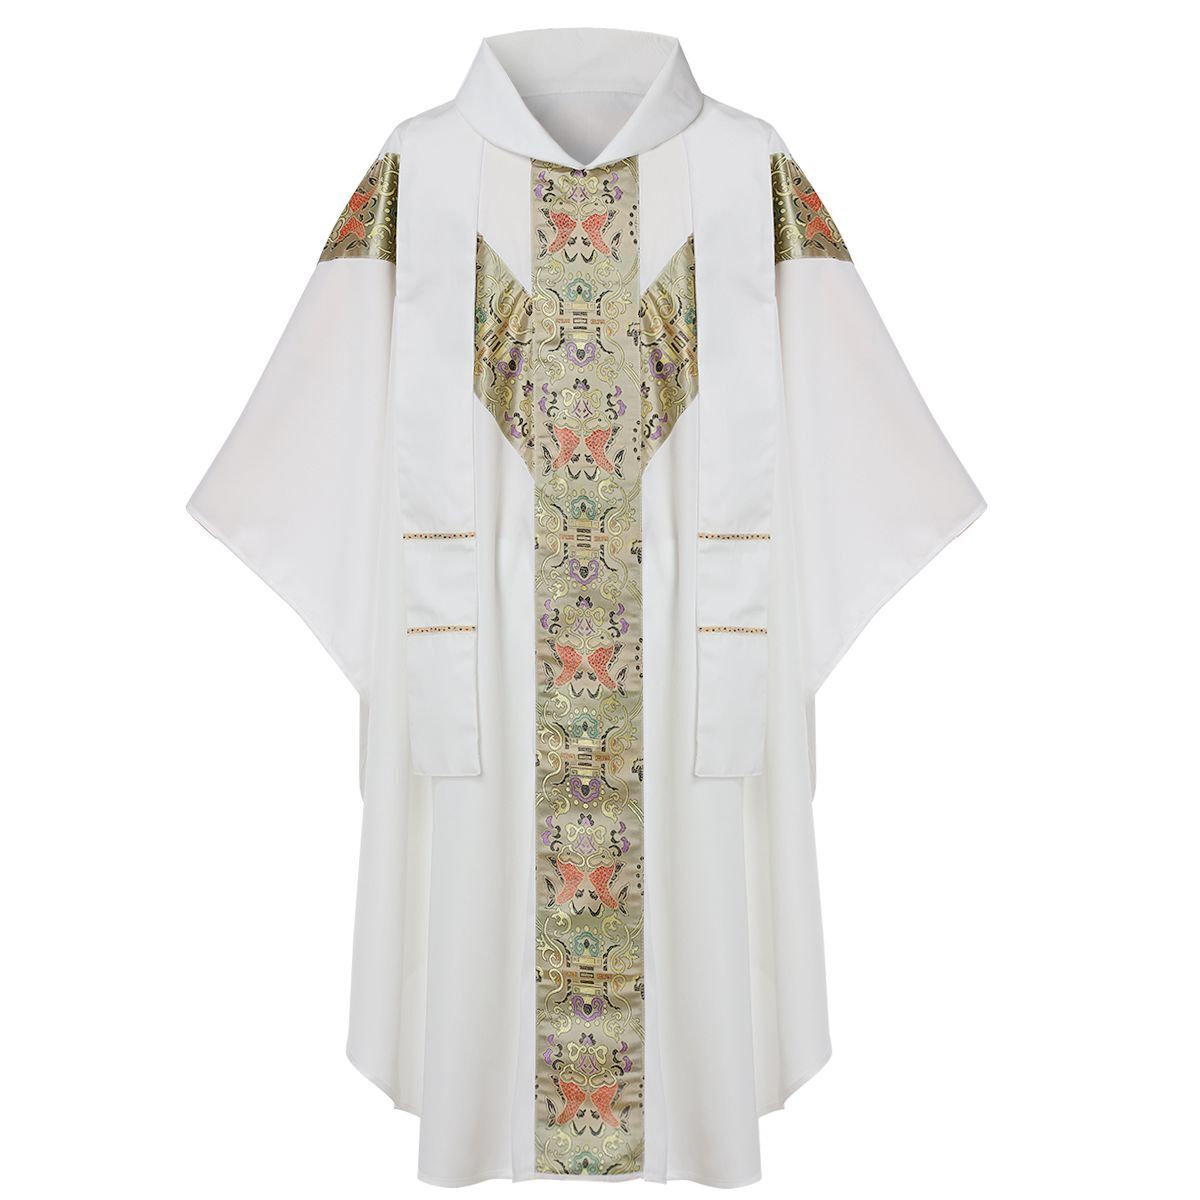 Church Clergy Vestments Catholic Priest Chasuble Cope J032 Robe with stole Blessume